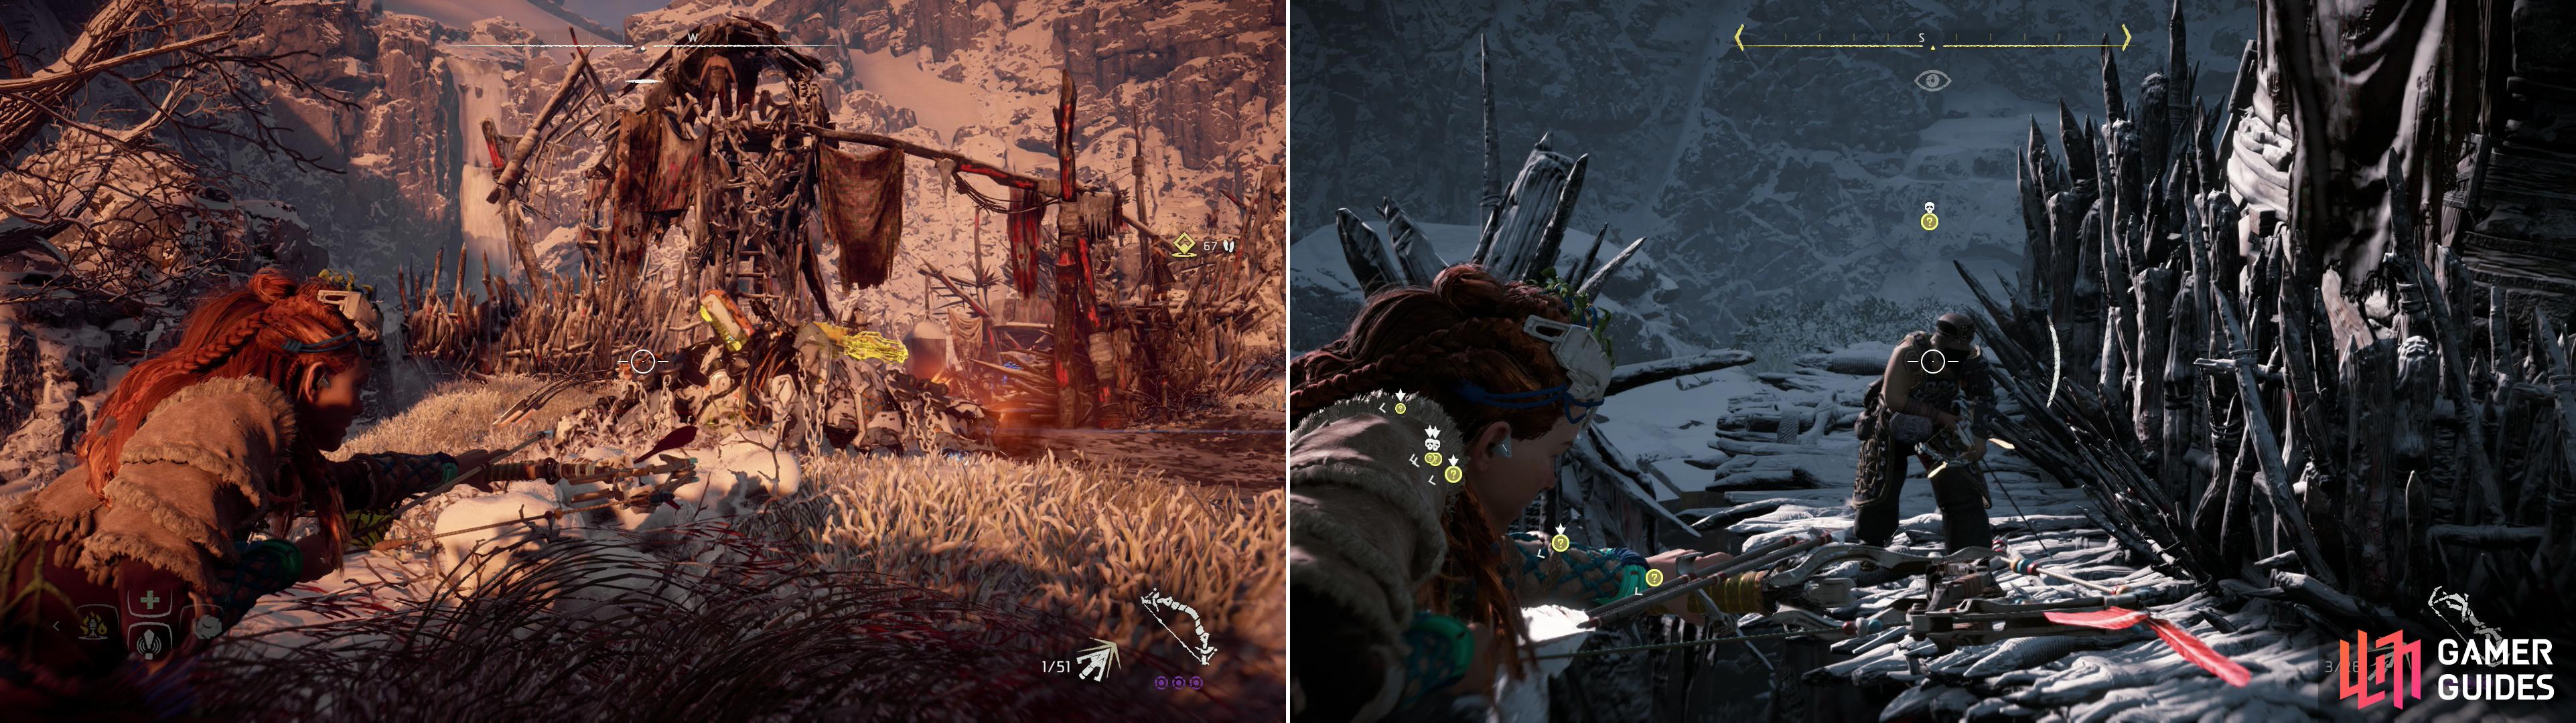 Metal Flower - Mark II (G) can be found north of Dervahl’s camp (left), but you’ll likely have to deal with a Stormbird to claim your prize (right).